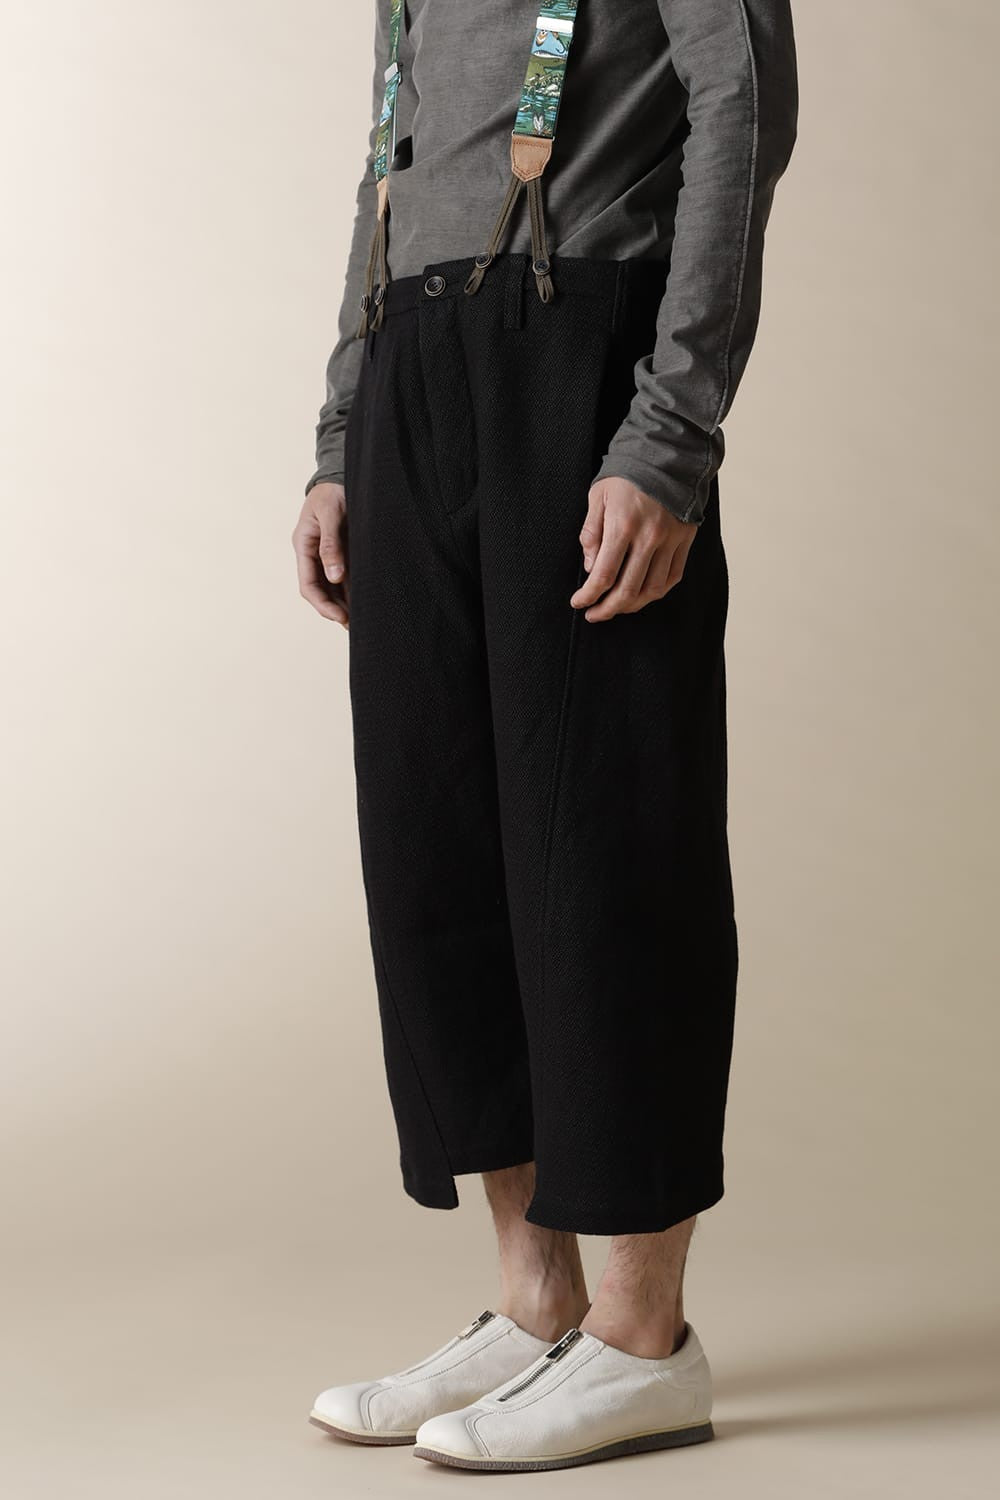 LOW CLOTCH CROPPED PANTS WITH SUSPENDERS - PA68-CLI10 (A)